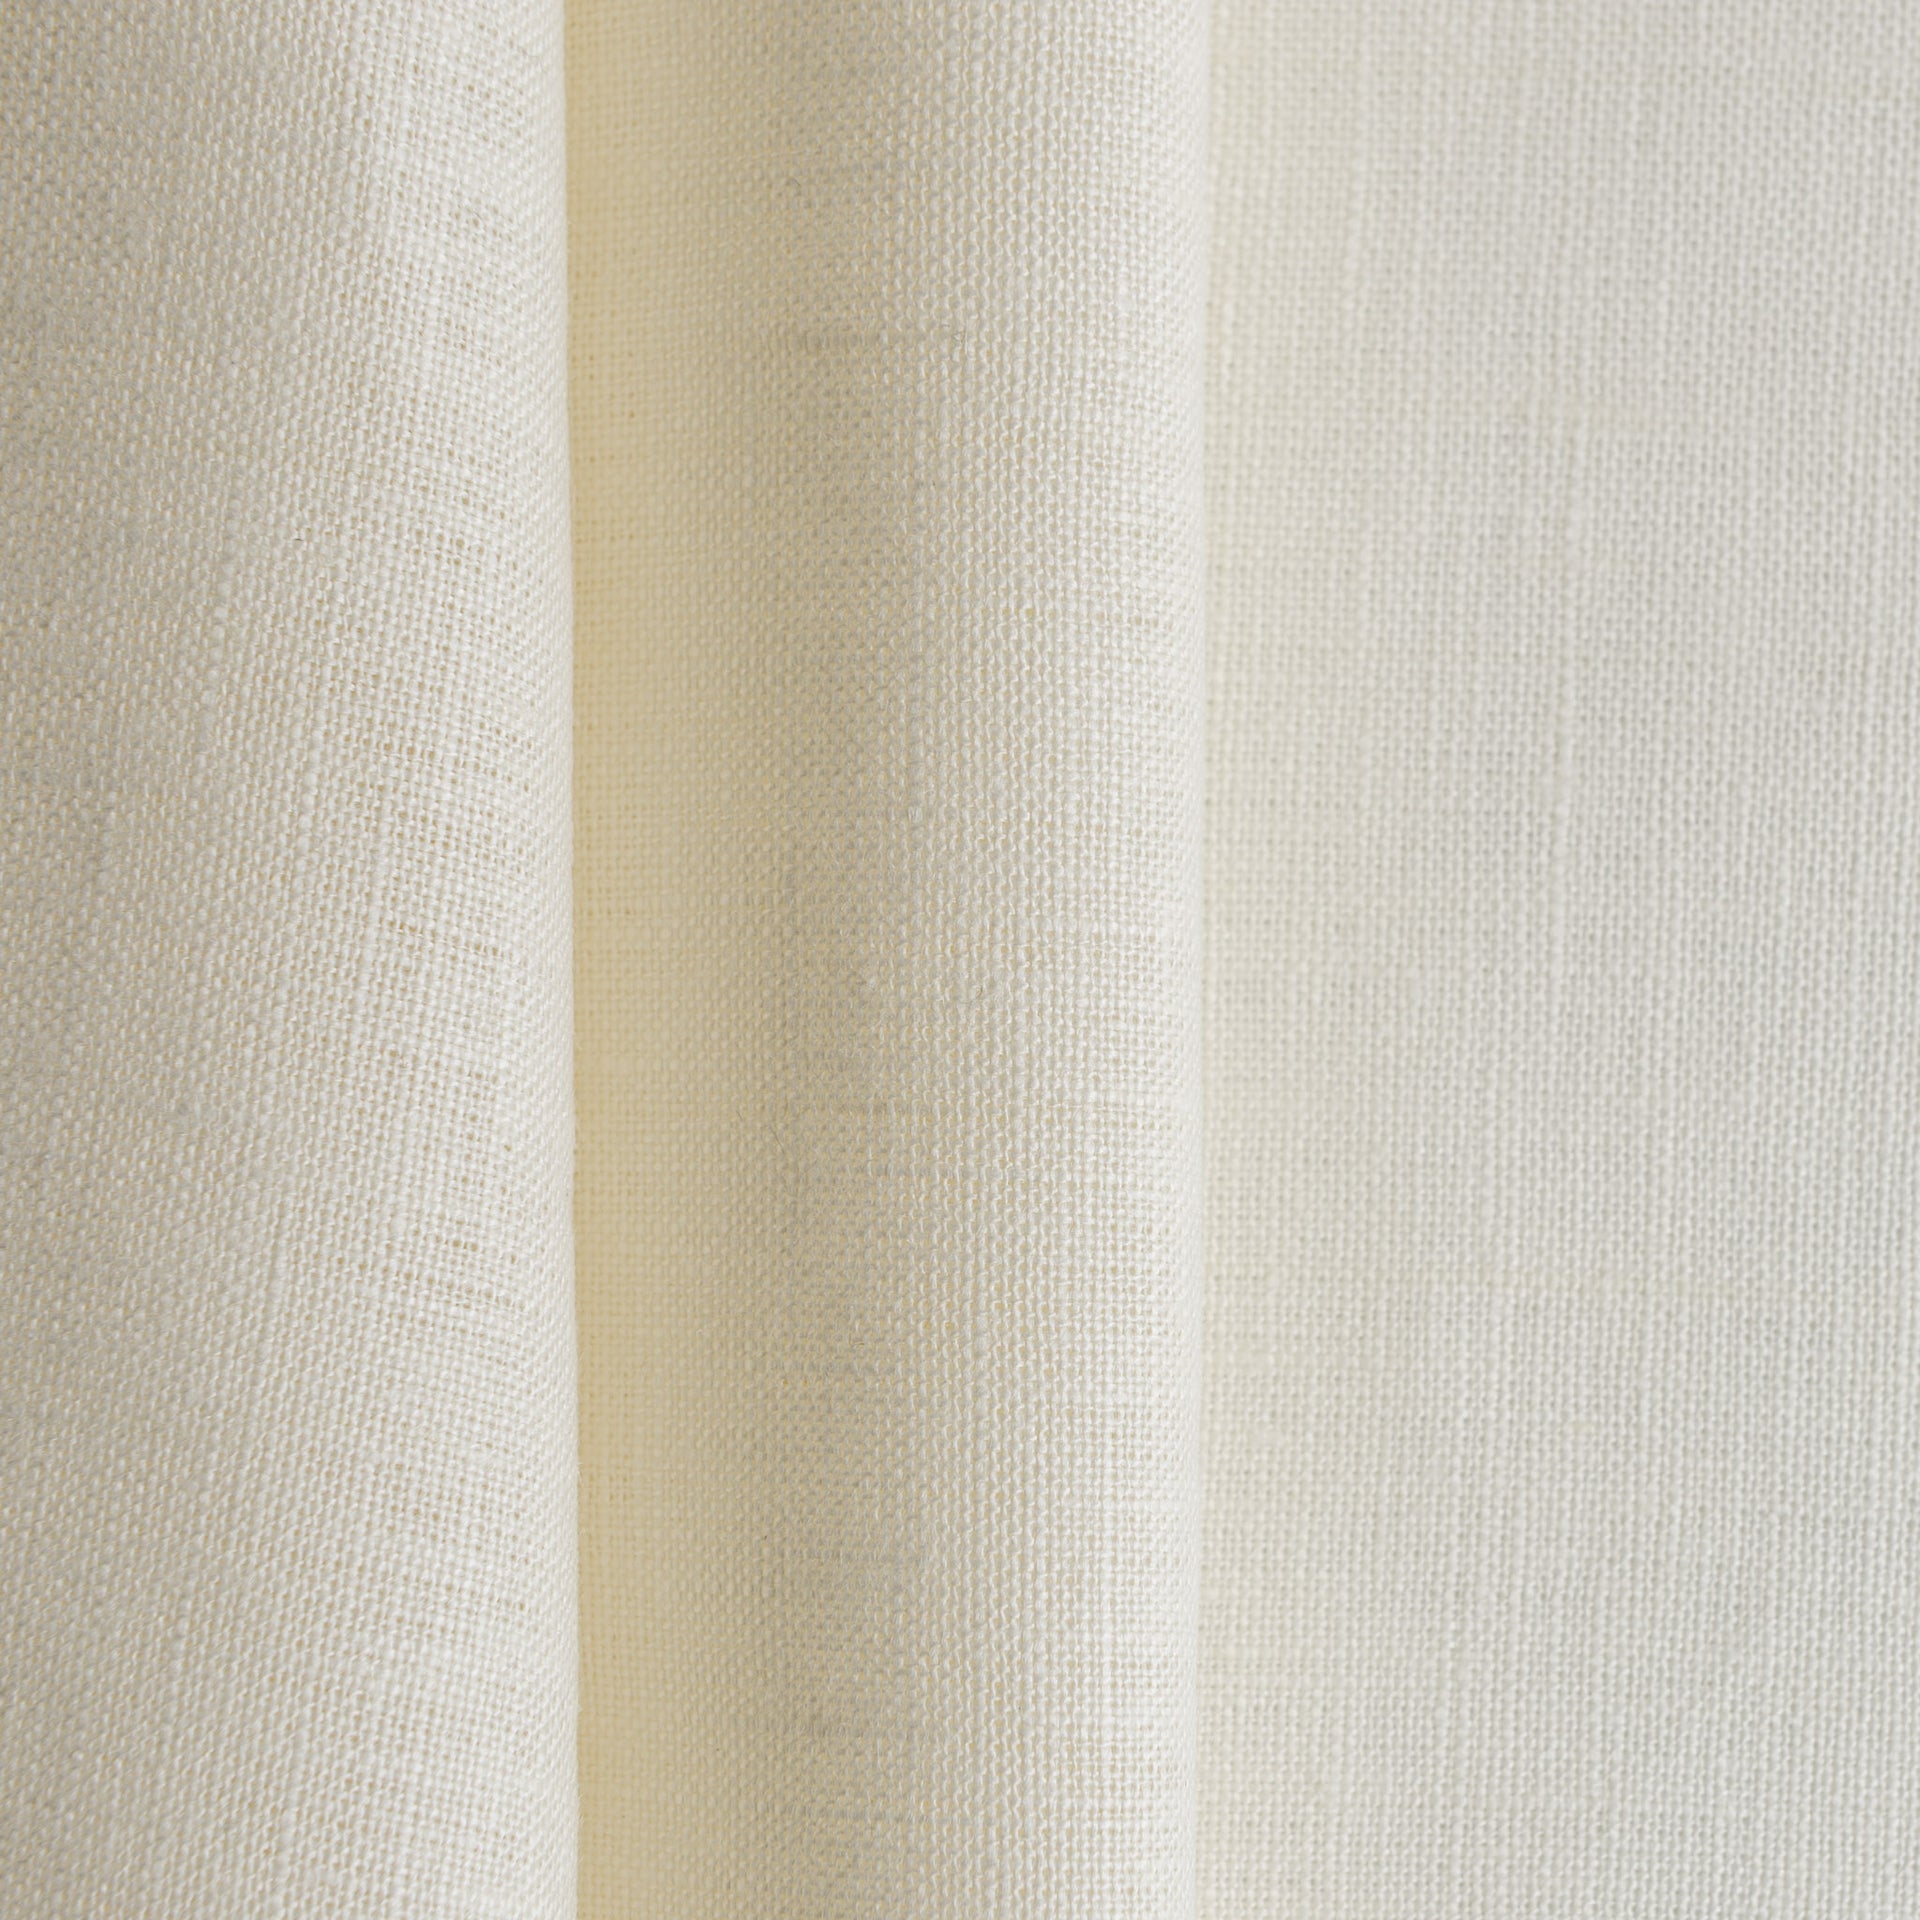 Cream S-Fold Linen Curtain Panel with Cotton Lining - Suitable for Rings and Hooks or Track, Color: cream